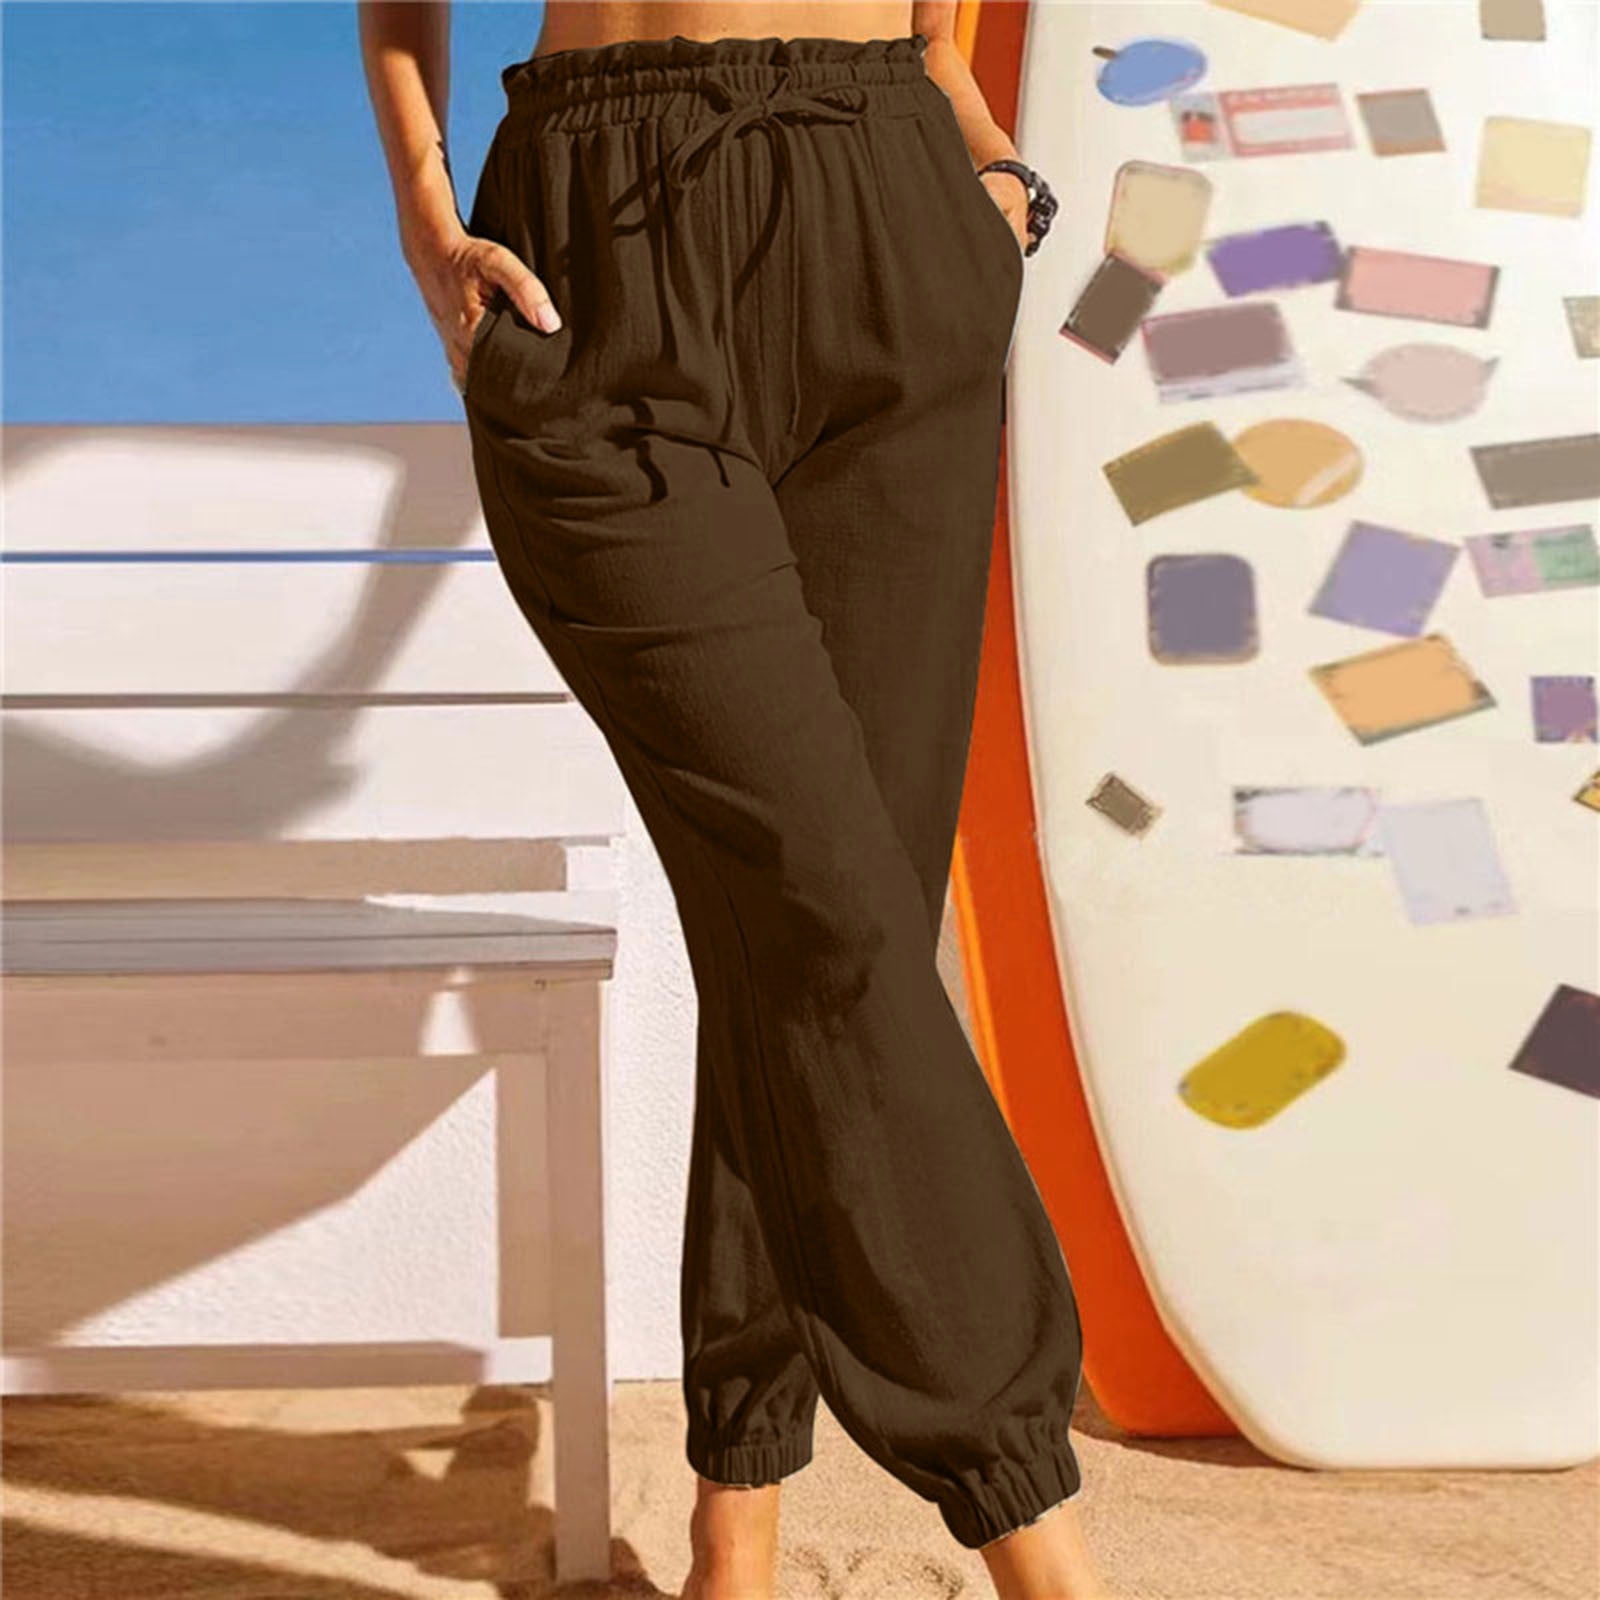 These Comfy and Stylish Summer Pants Are Under $50 at Amazon